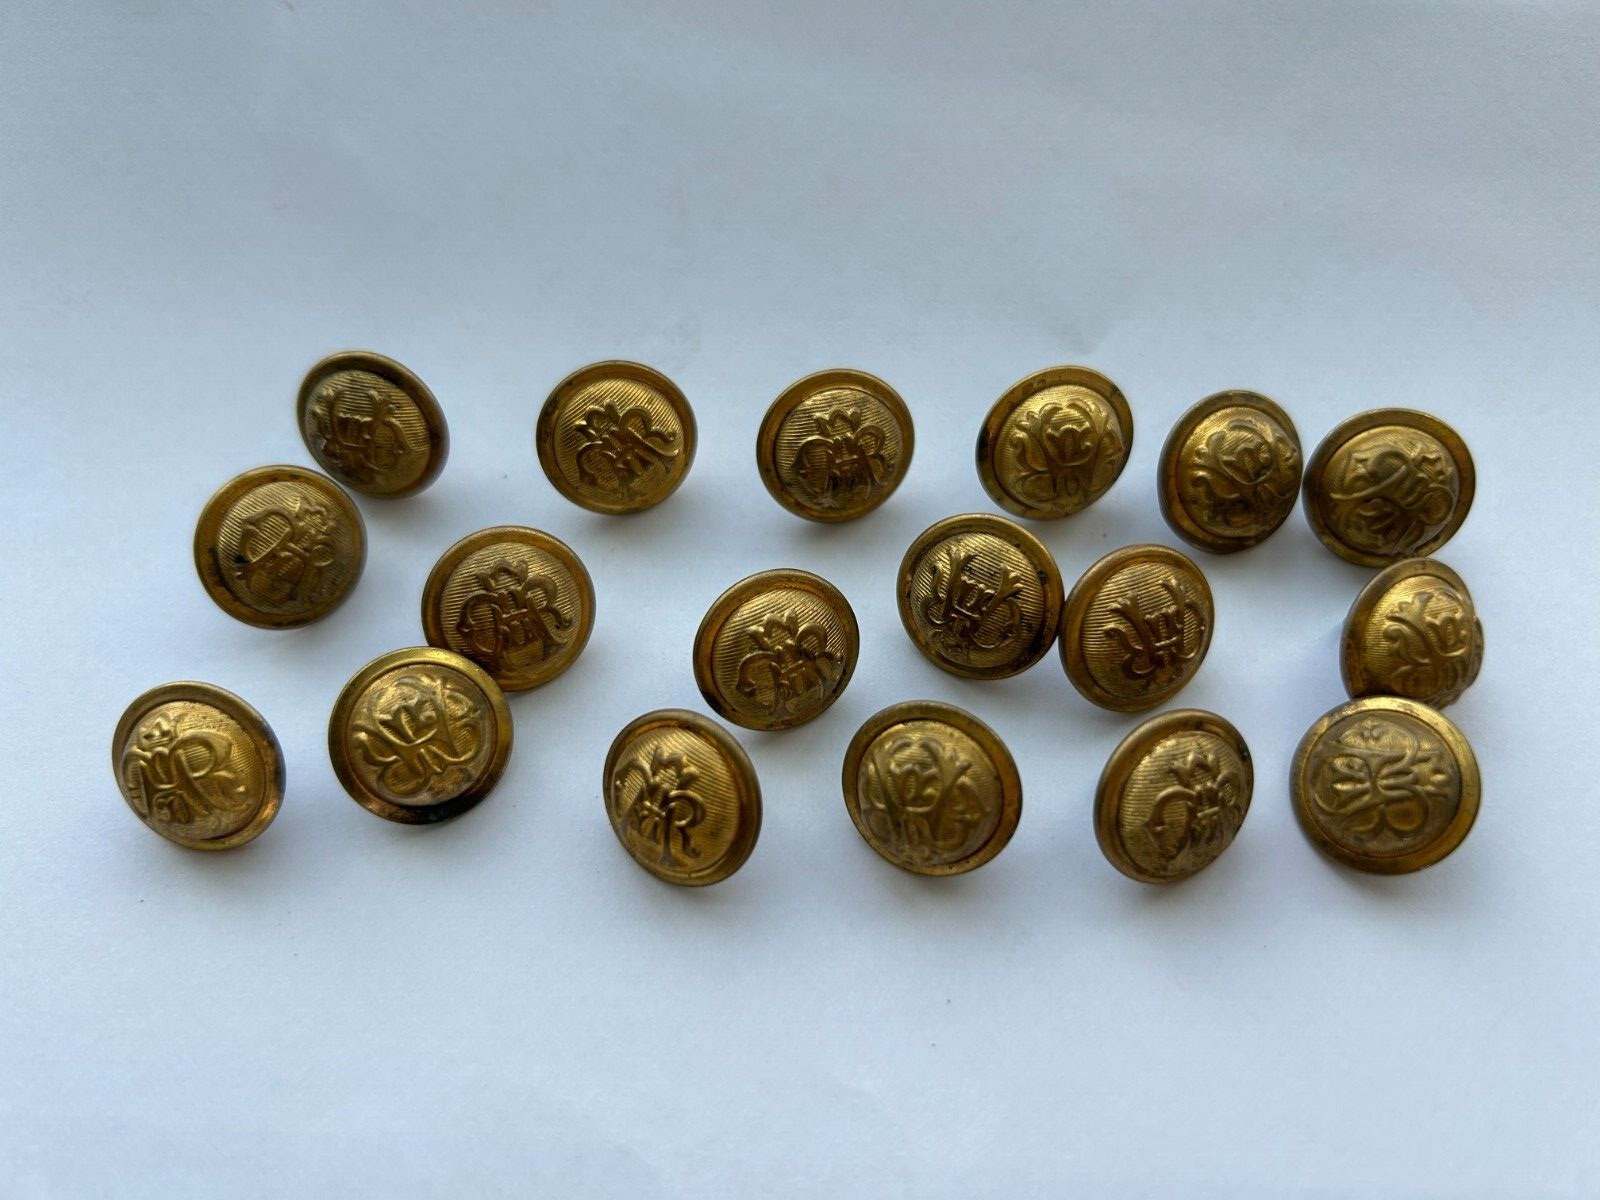 Lot of 18 GAR Buttons - Grand Army of the Republic Cuff buttons 15 mm